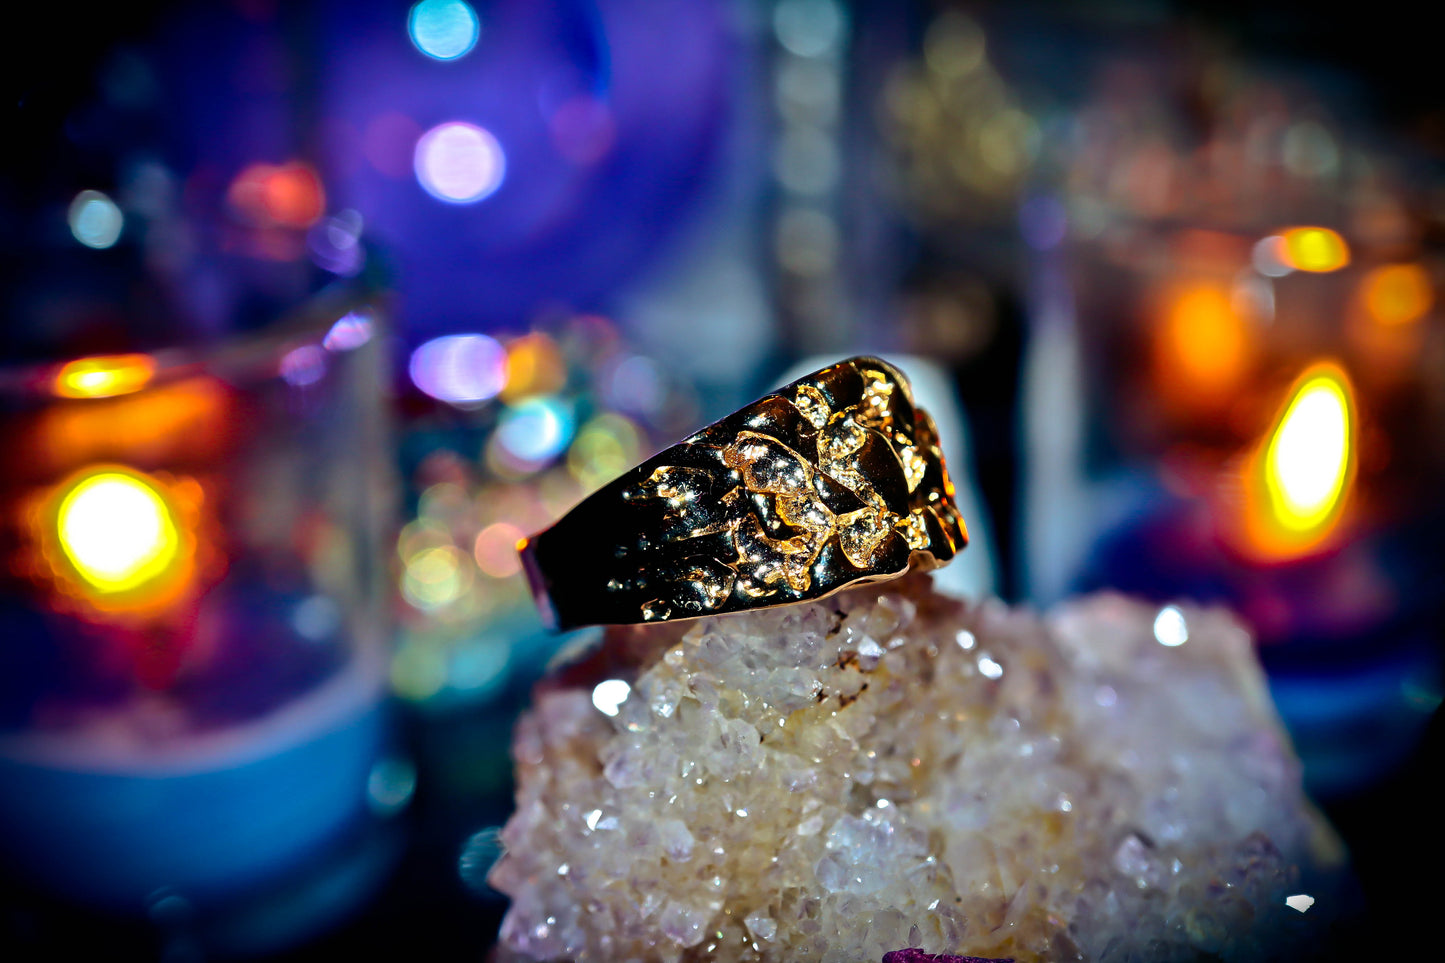 MAGICK MONEY MAGNET! Spell Ring of Ultimate Wealth & Riches ~ Haunted Master Warlock Ring! Wealth $$$